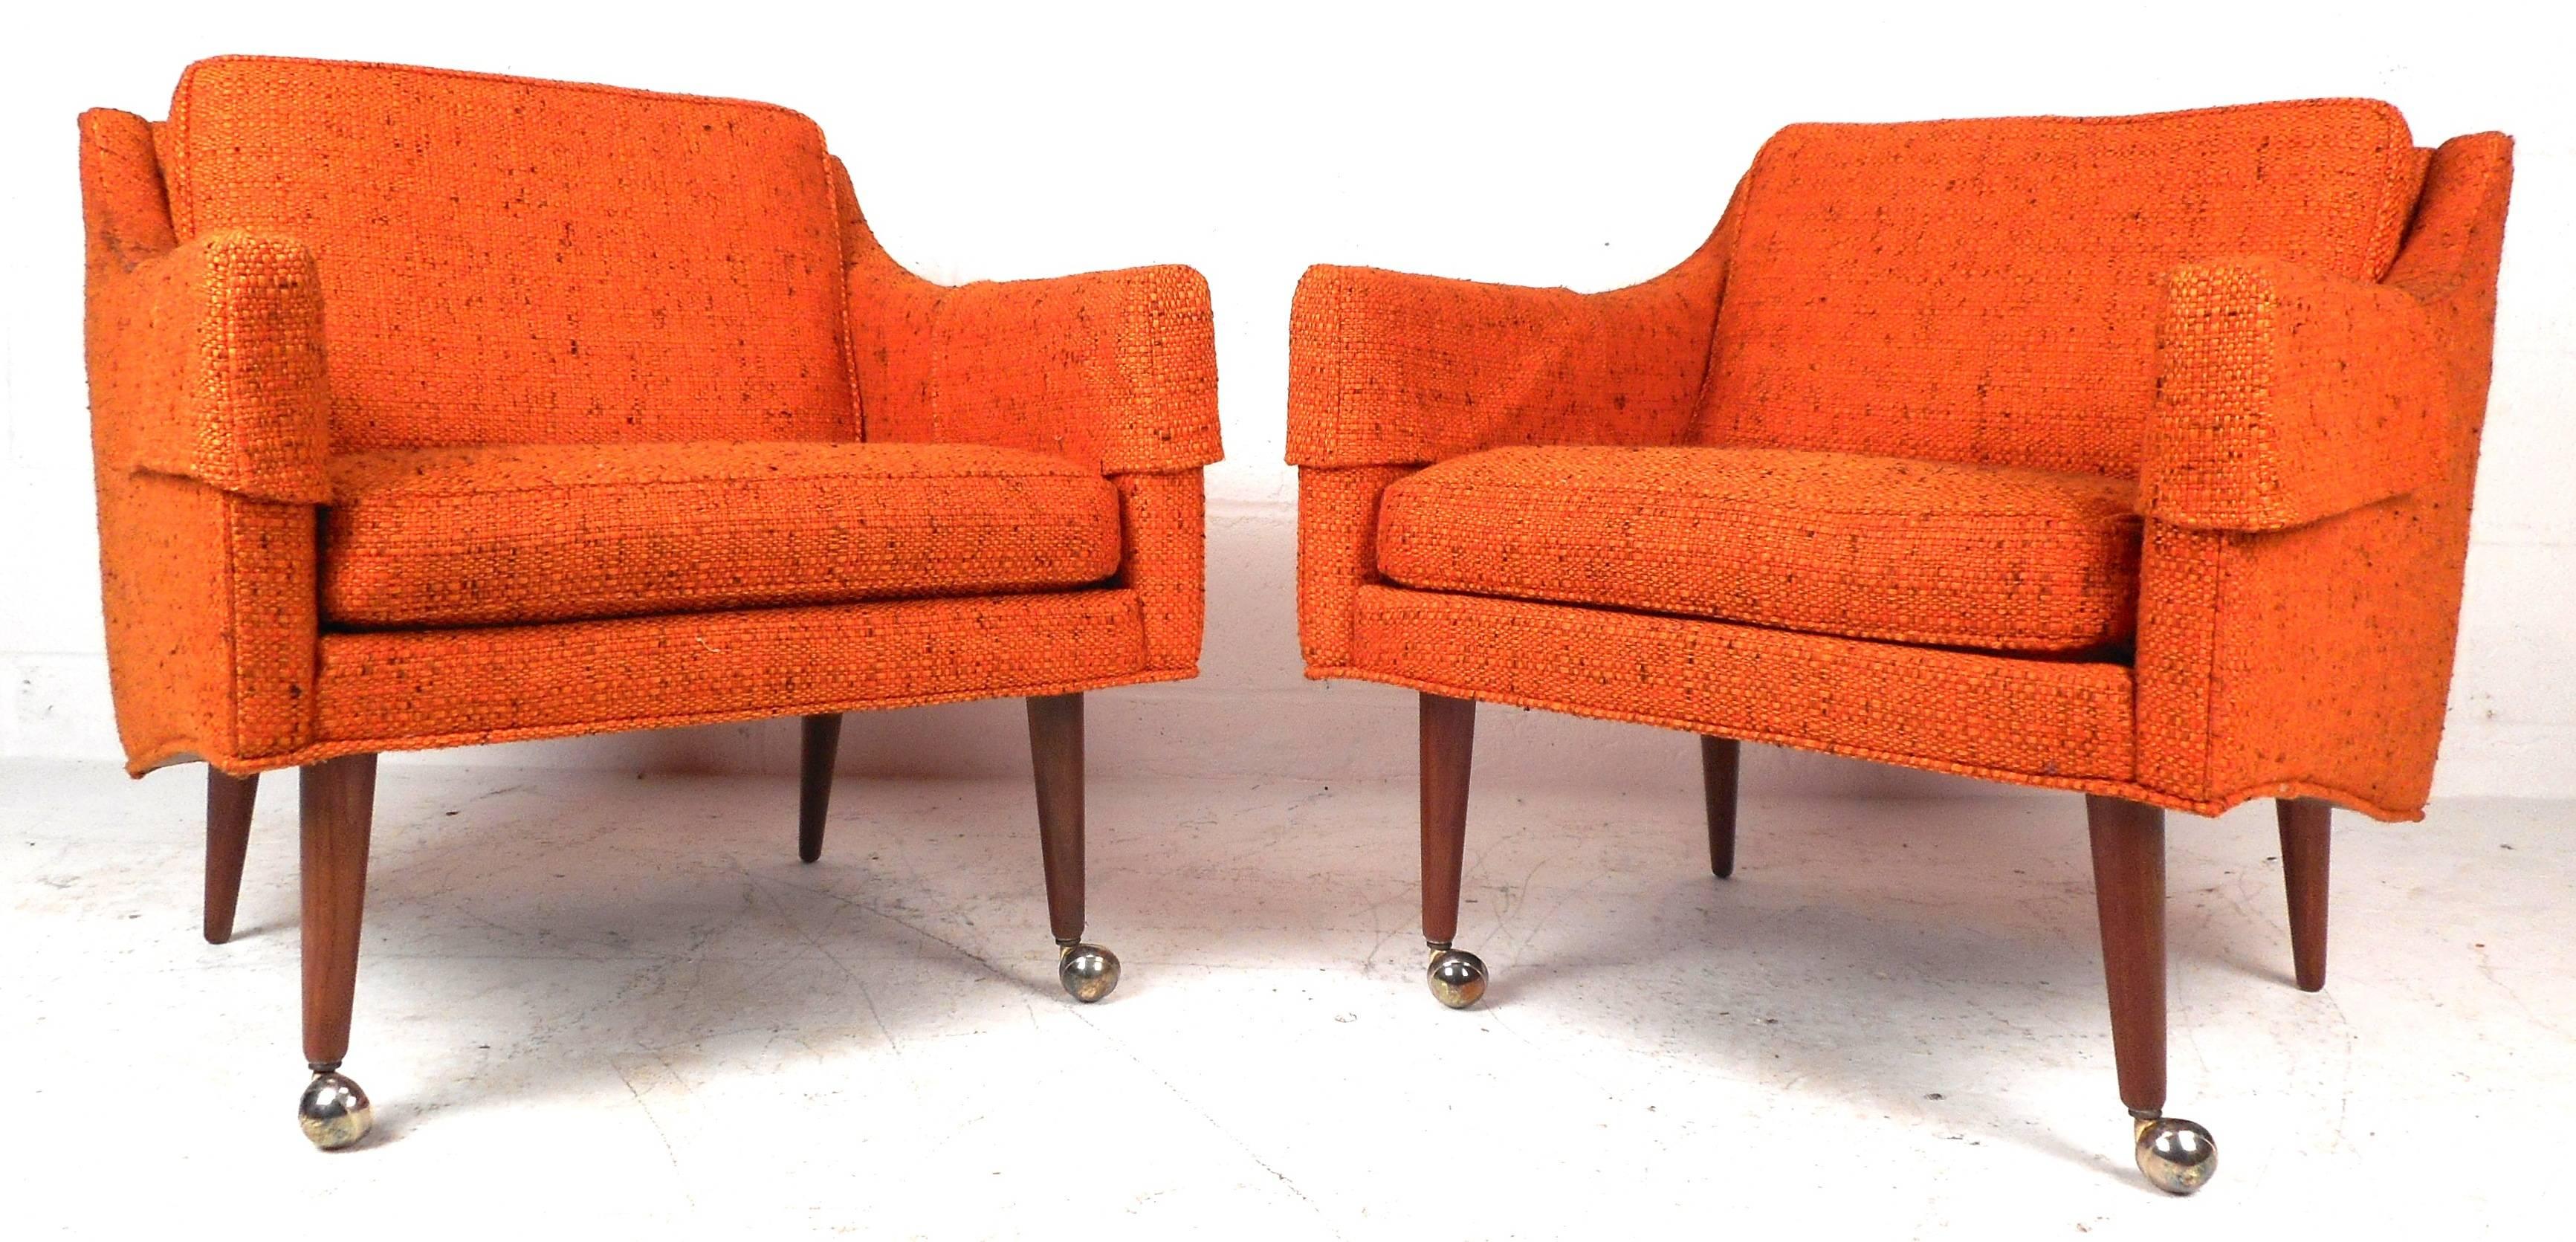 This stunning set of four vintage modern lounge chairs feature wonderful vintage orange upholstery and tapered walnut legs. Sleek design with thick padded removable cushions and stylish low arm rests ensuring maximum comfort. This unique set of four